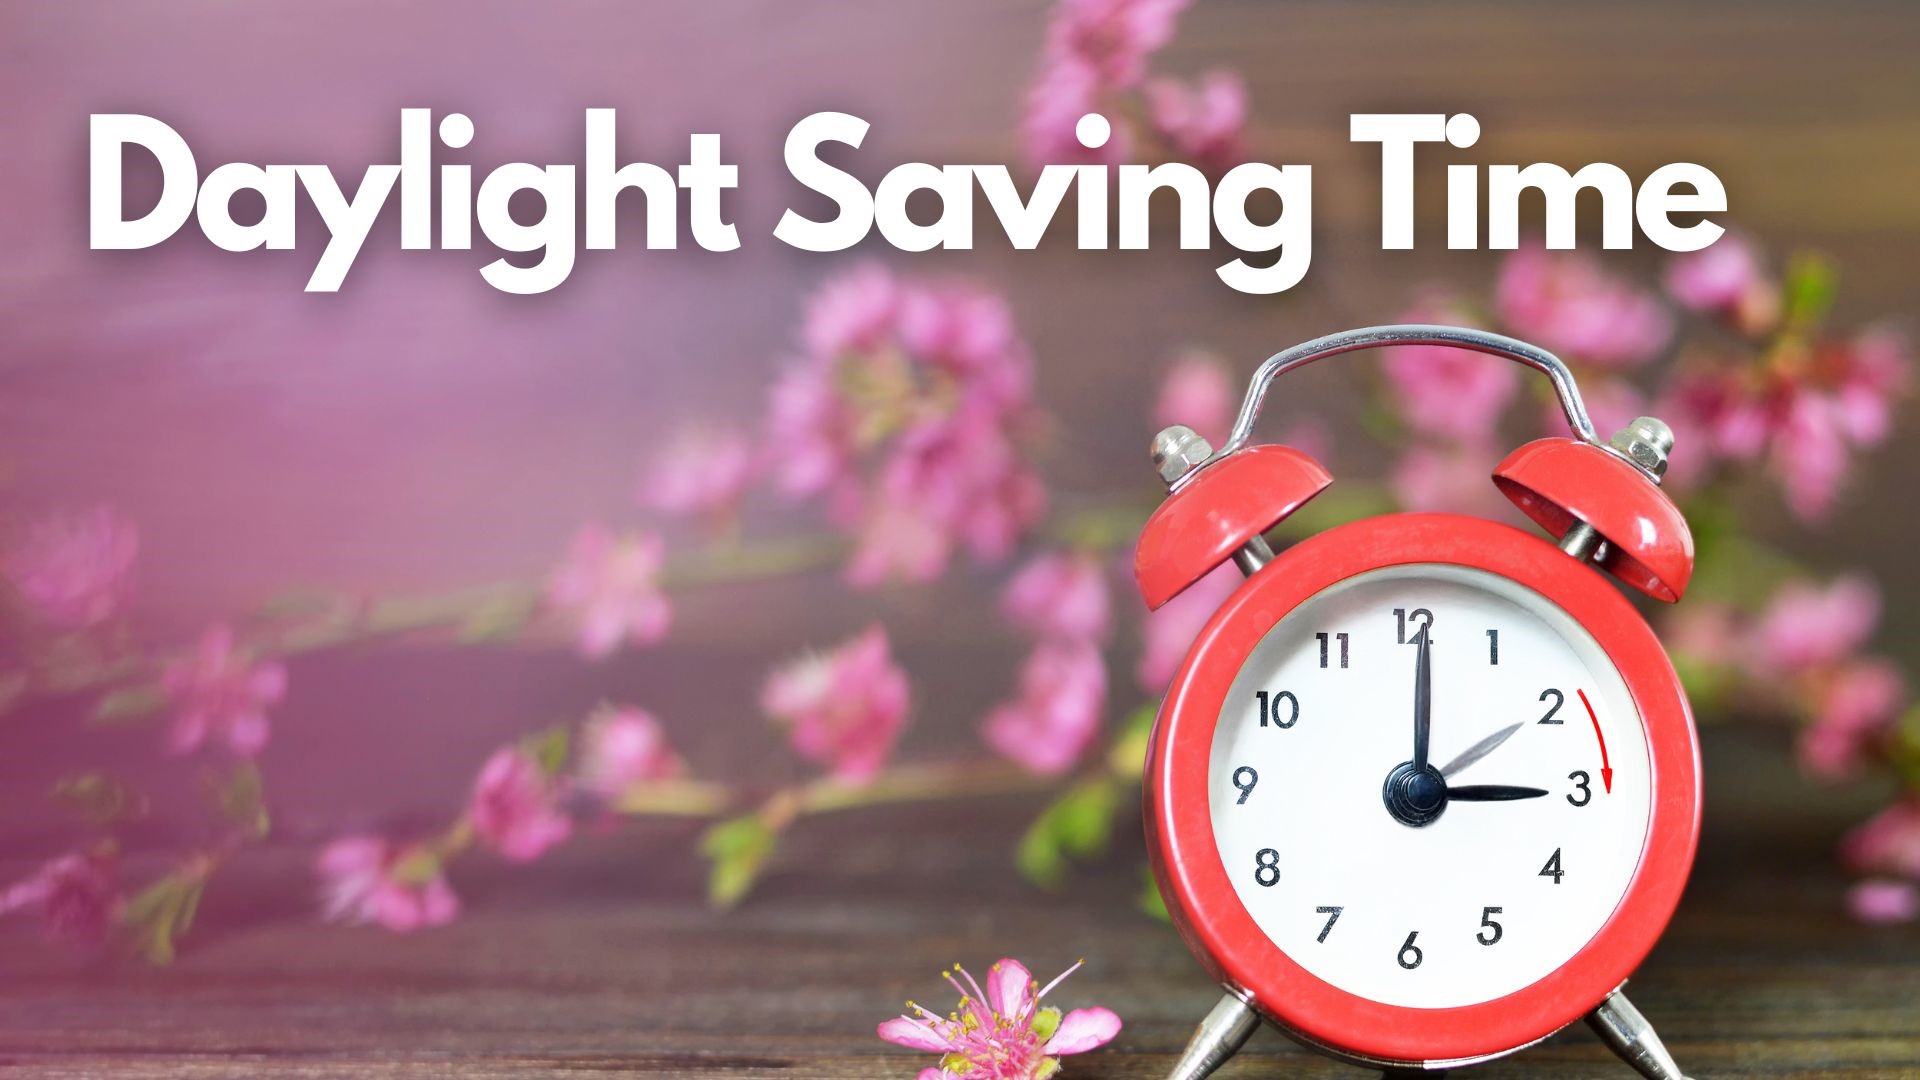 Will daylight saving time be permanent in 2023?